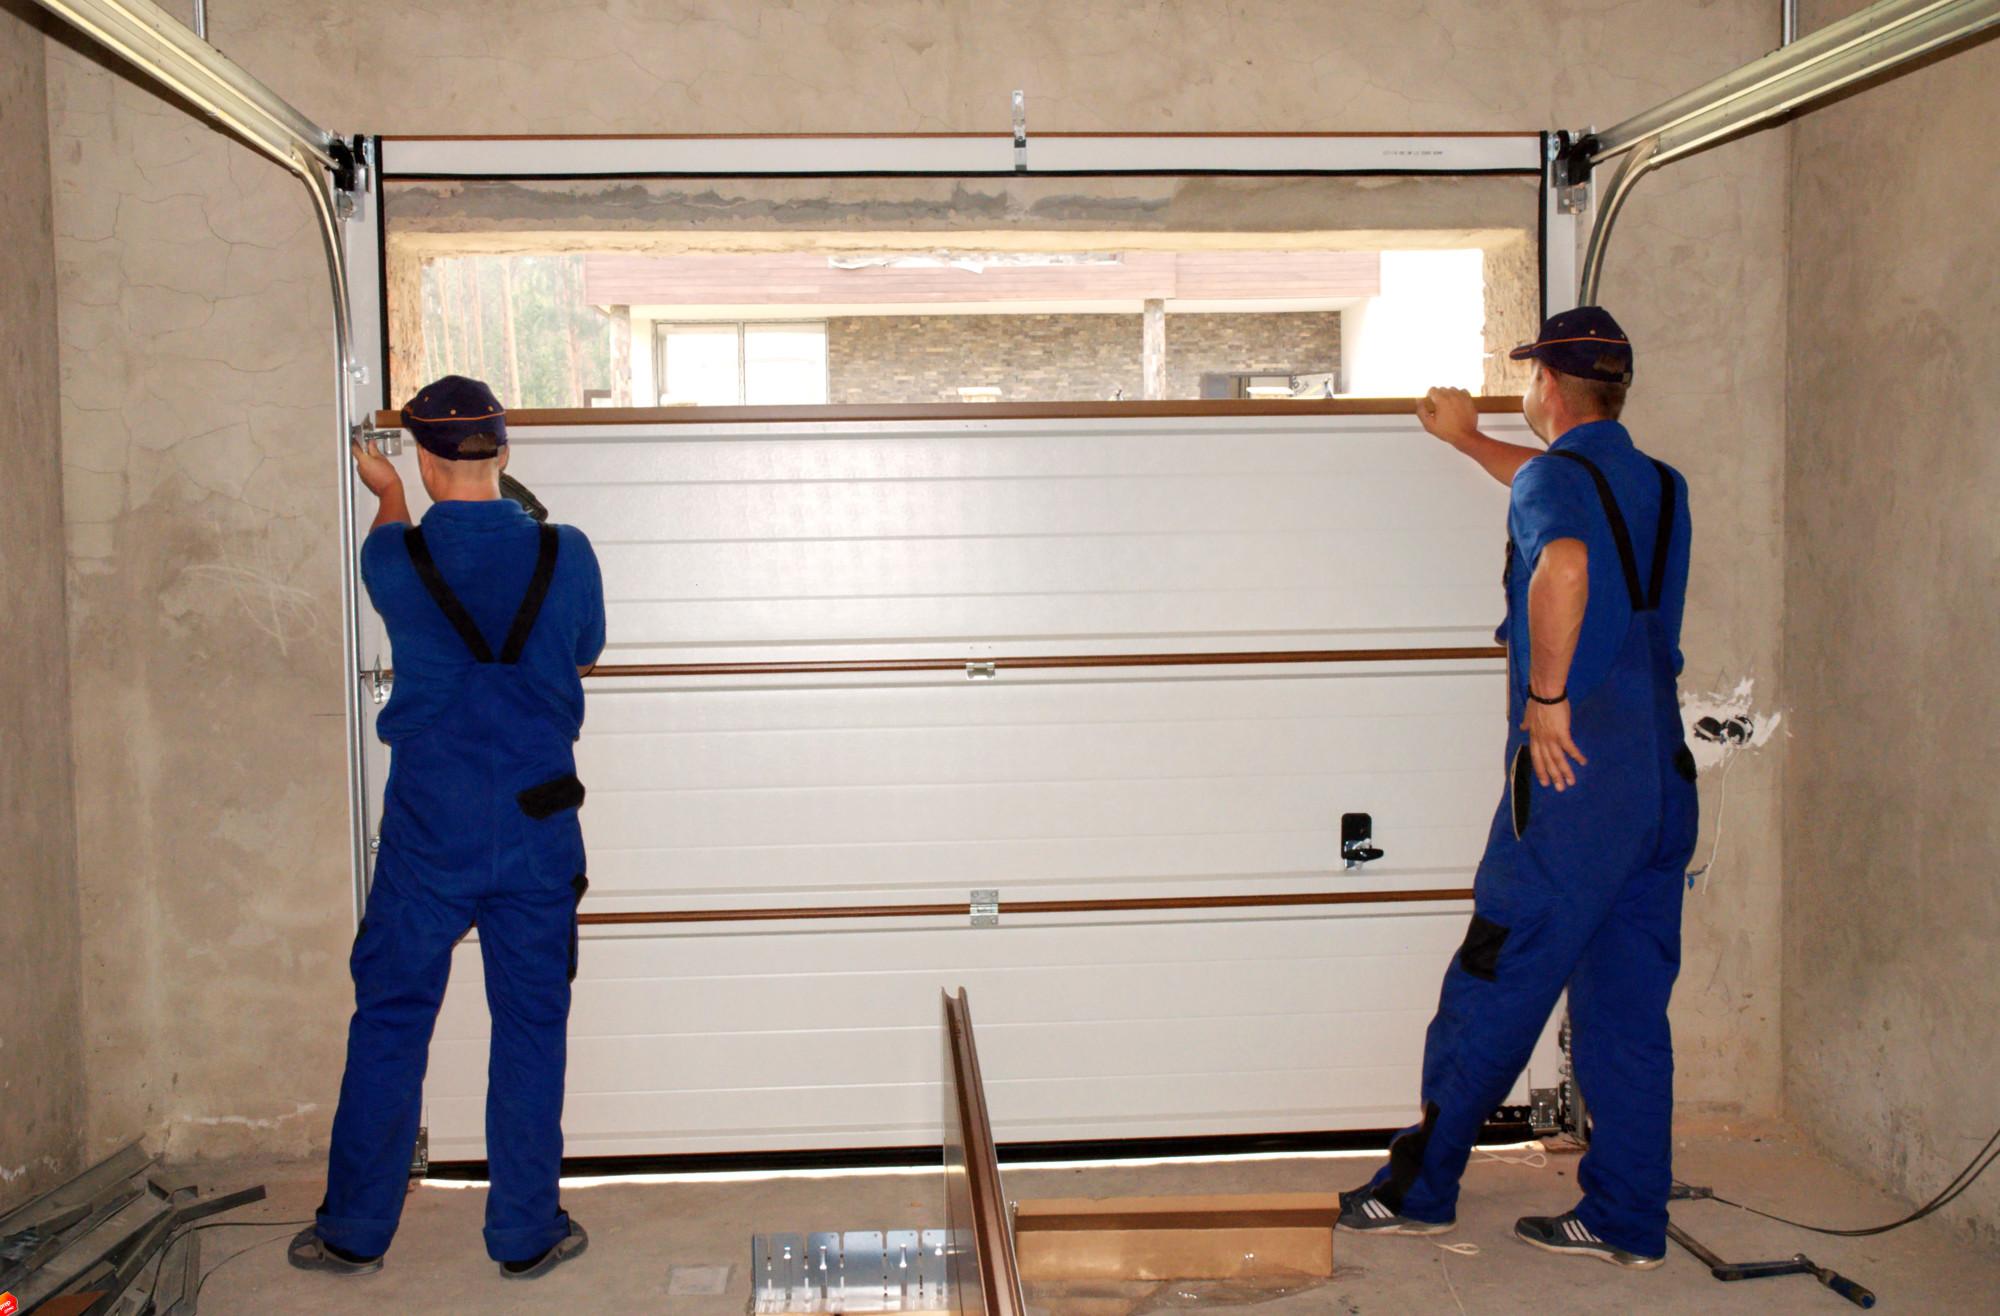 Do You Tip Garage Door Installers for Their Service? To Tip or Not To Tip